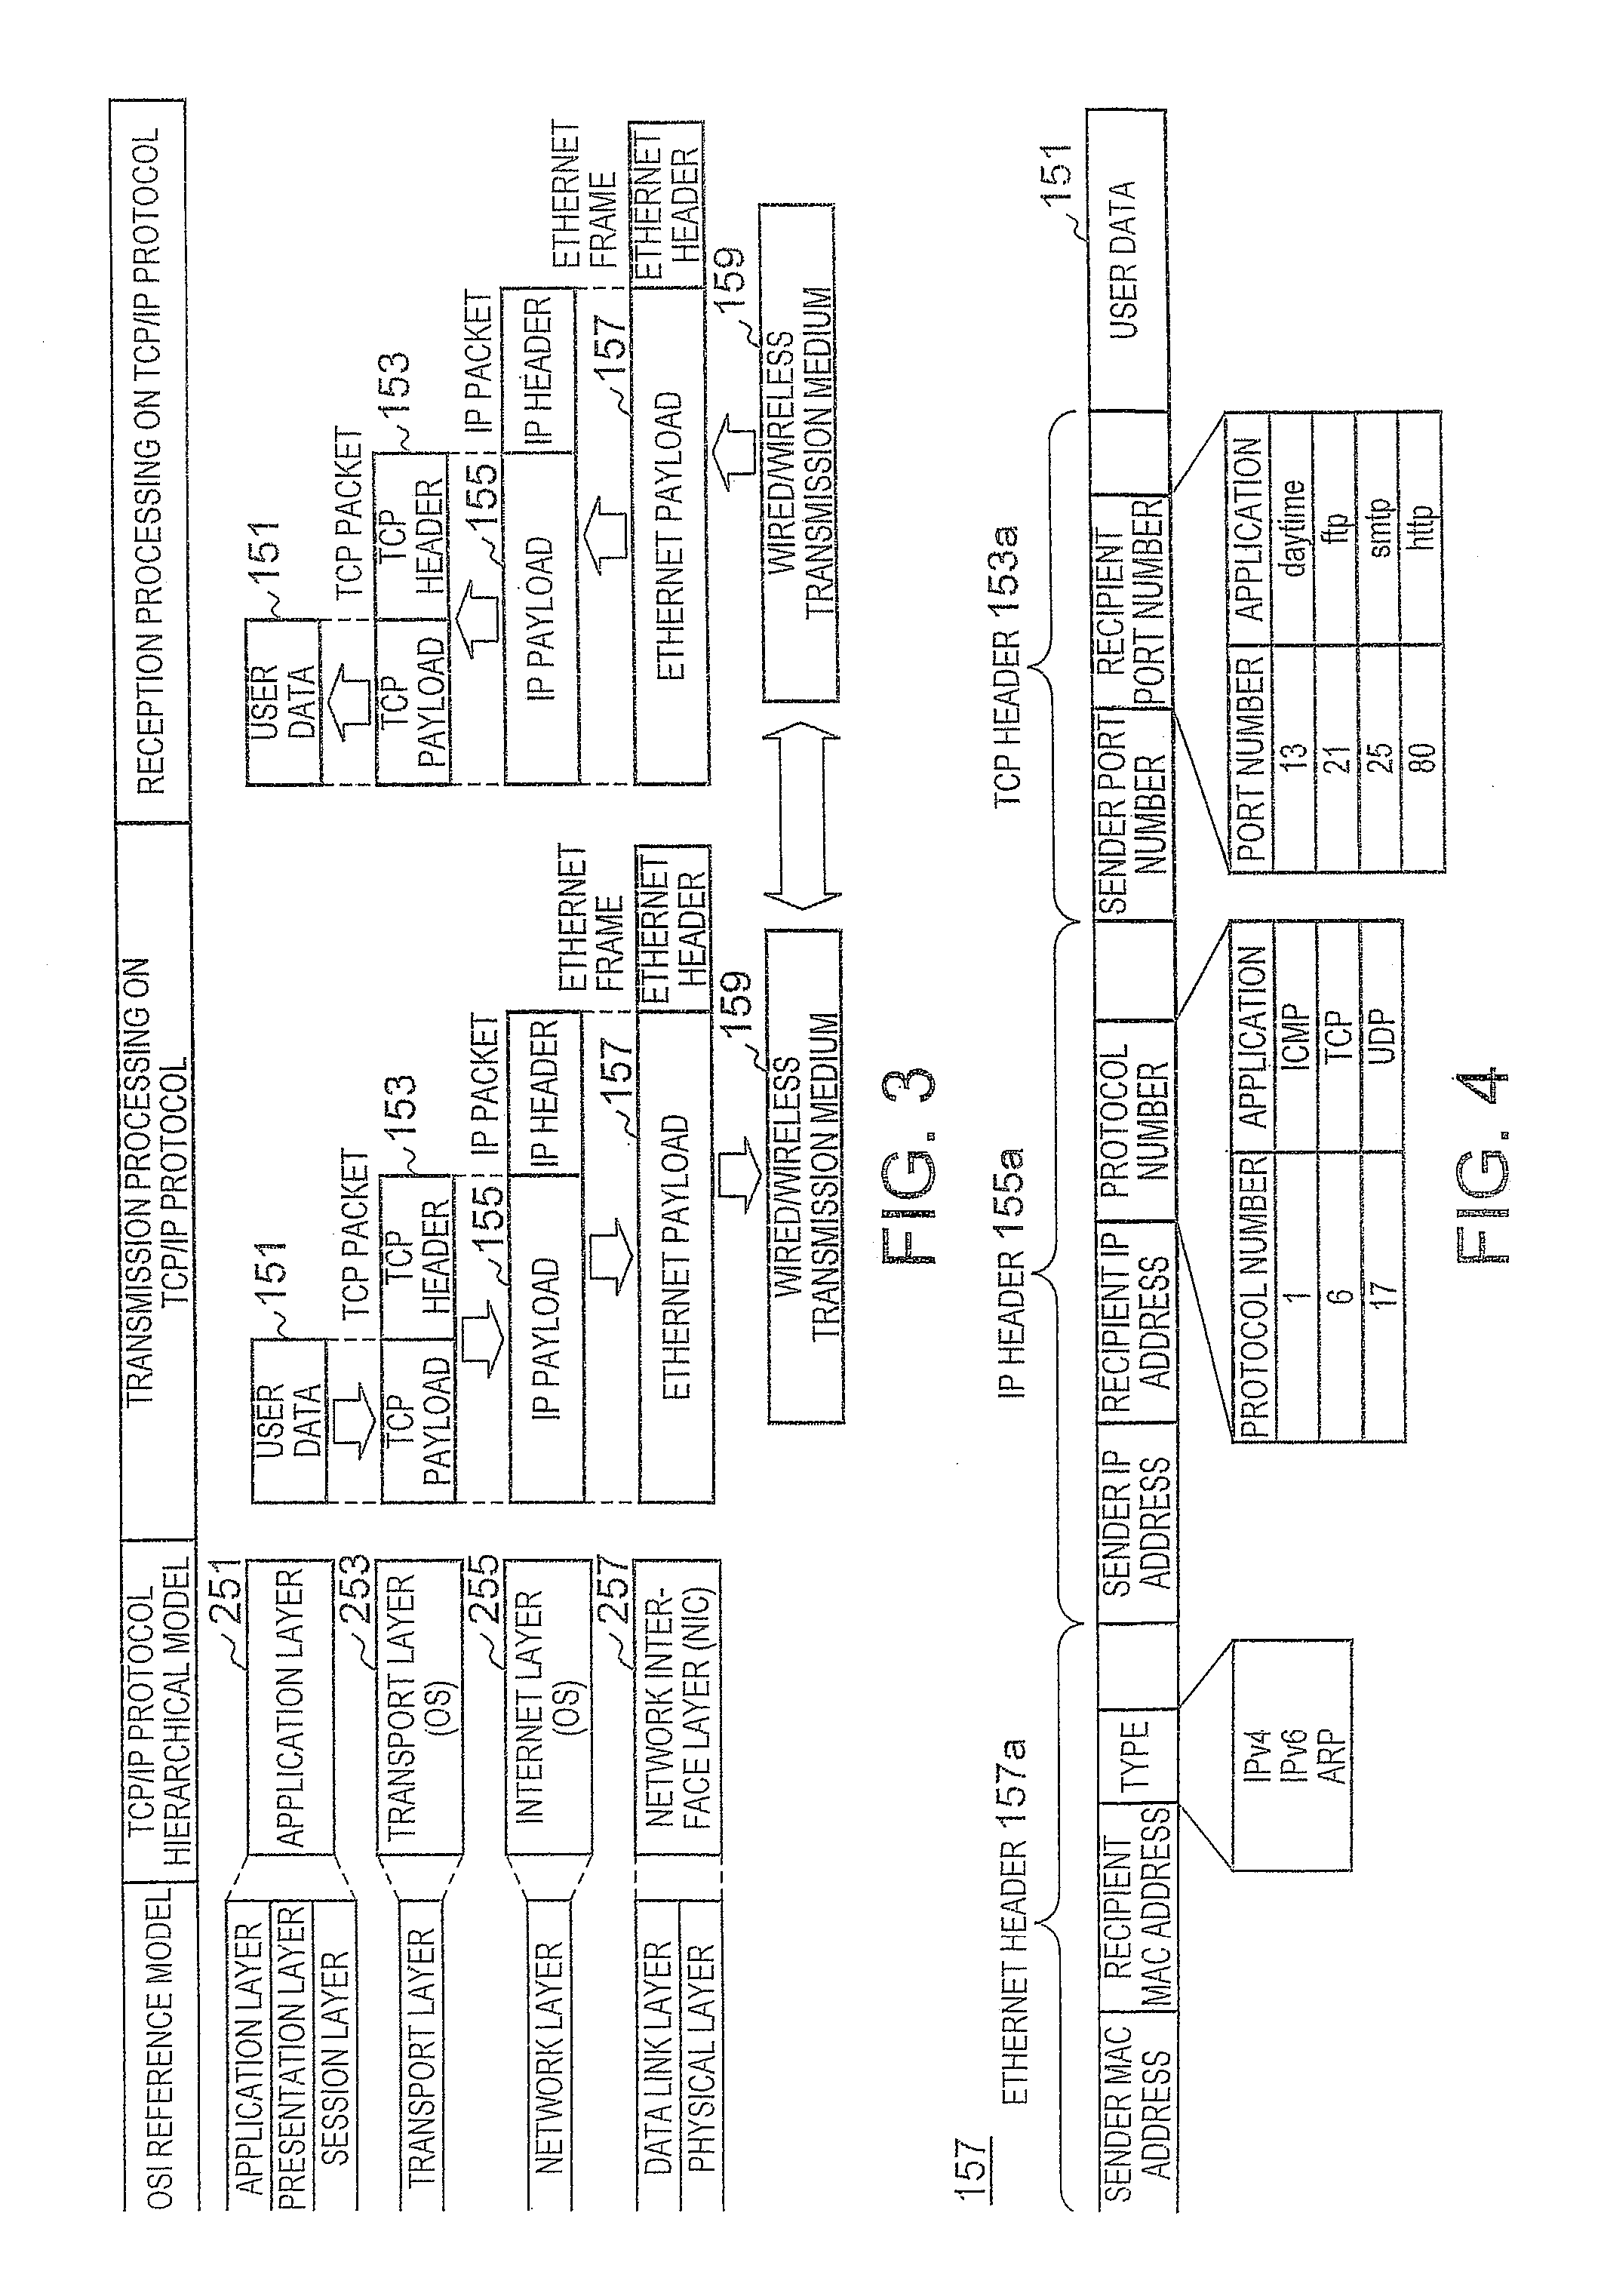 Method for Ensuring Security of Computers Connected to a Network